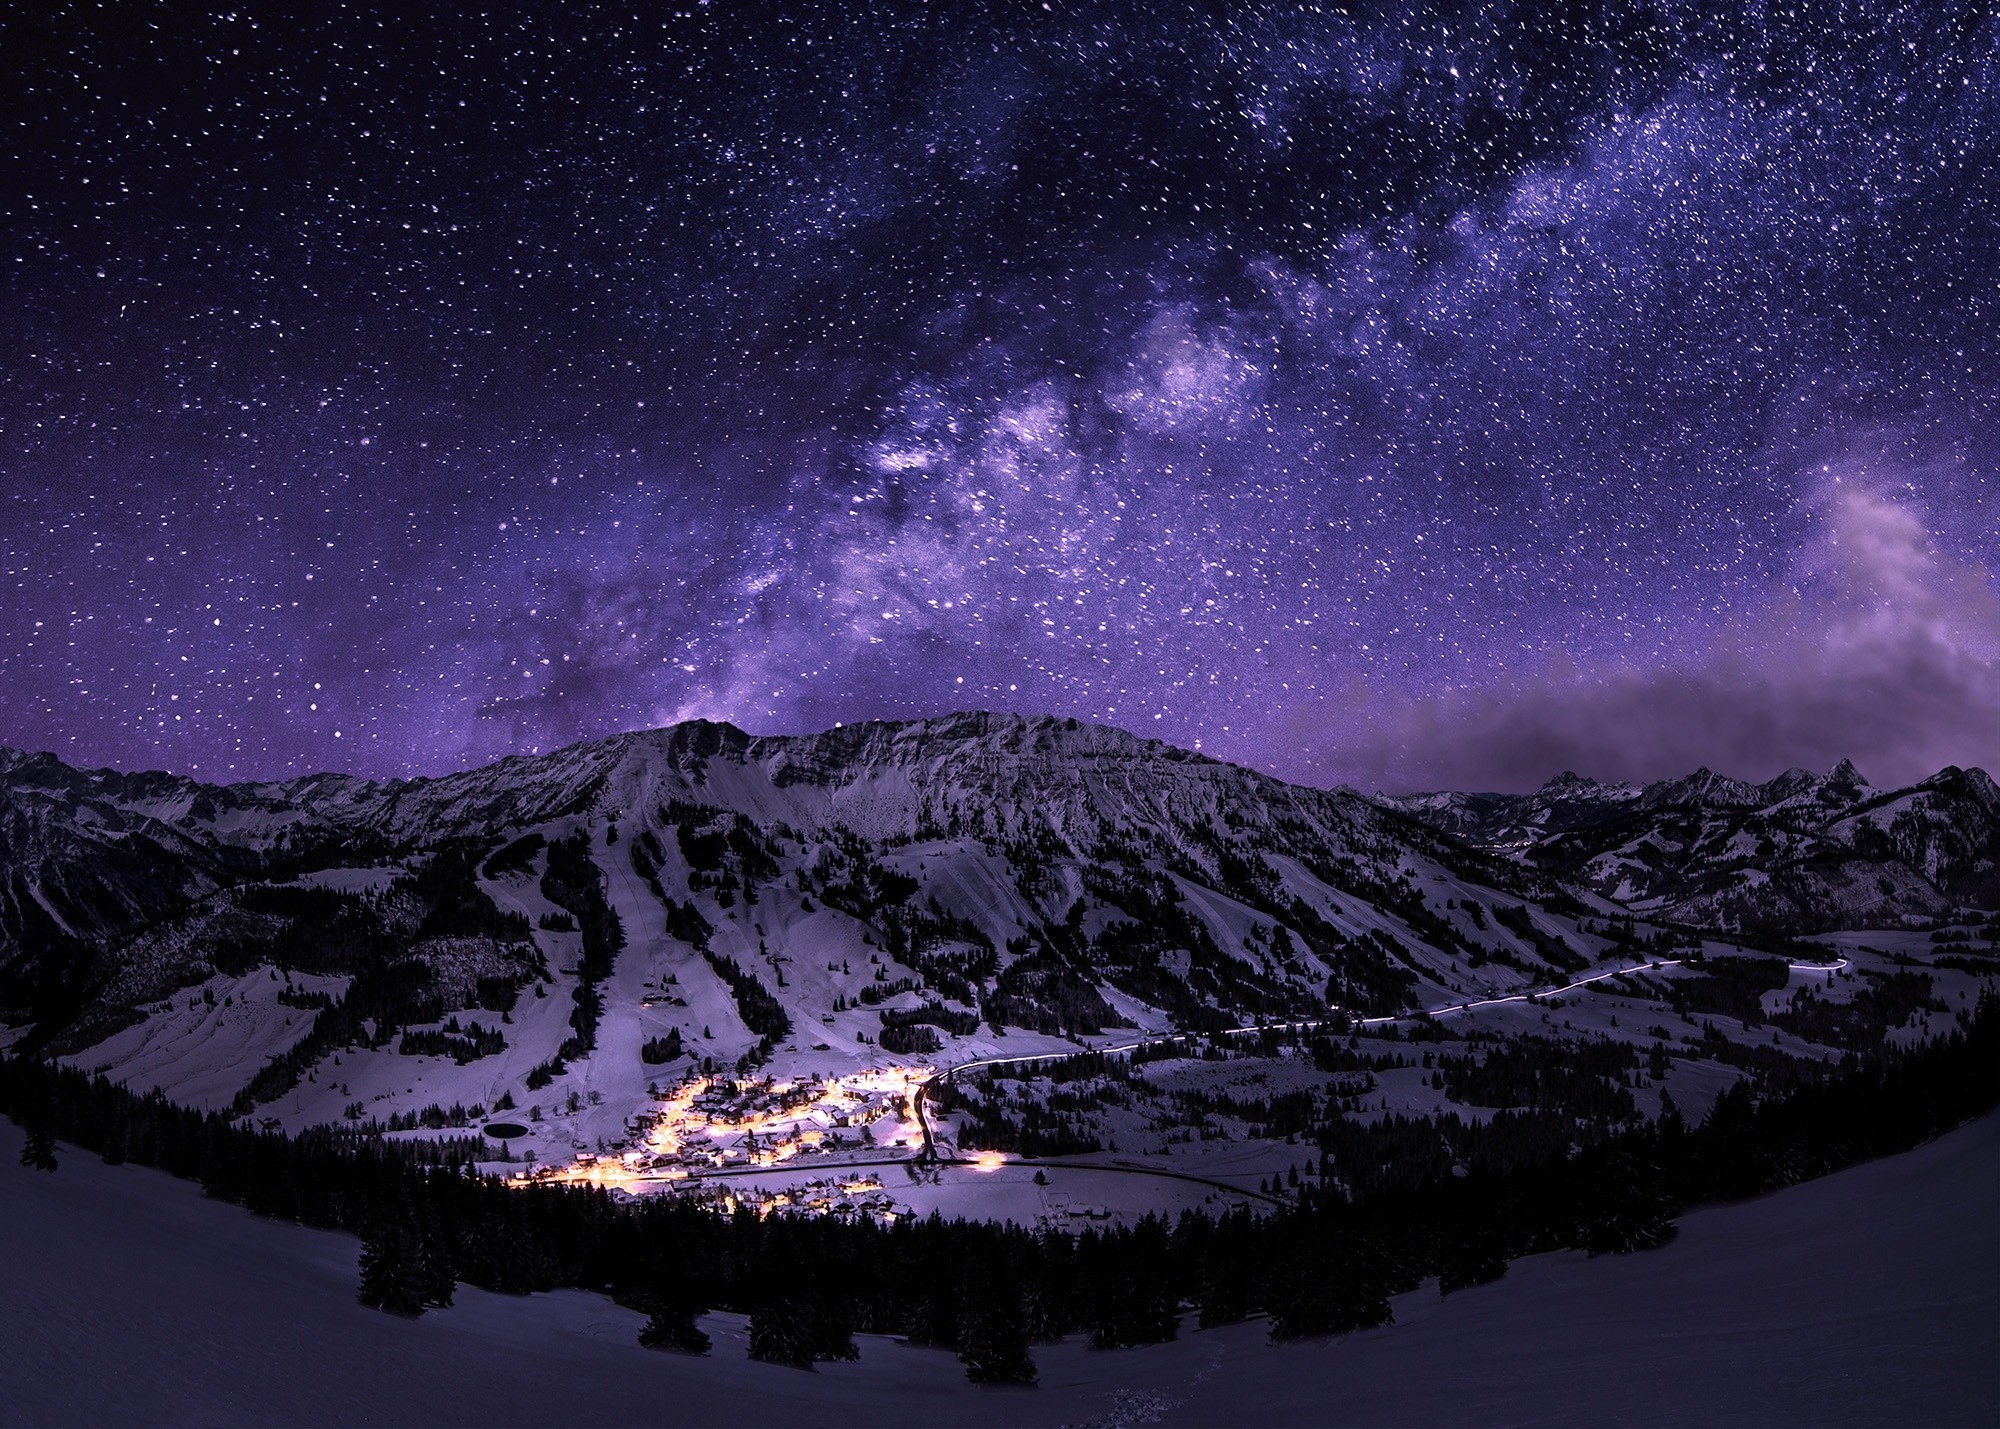 2000x1429 stars, Night, Landscape, Starry Night, Mountain, Snow, Long Exposure, Town, Galaxy  Wallpapers HD / Desktop and Mobile Backgrounds